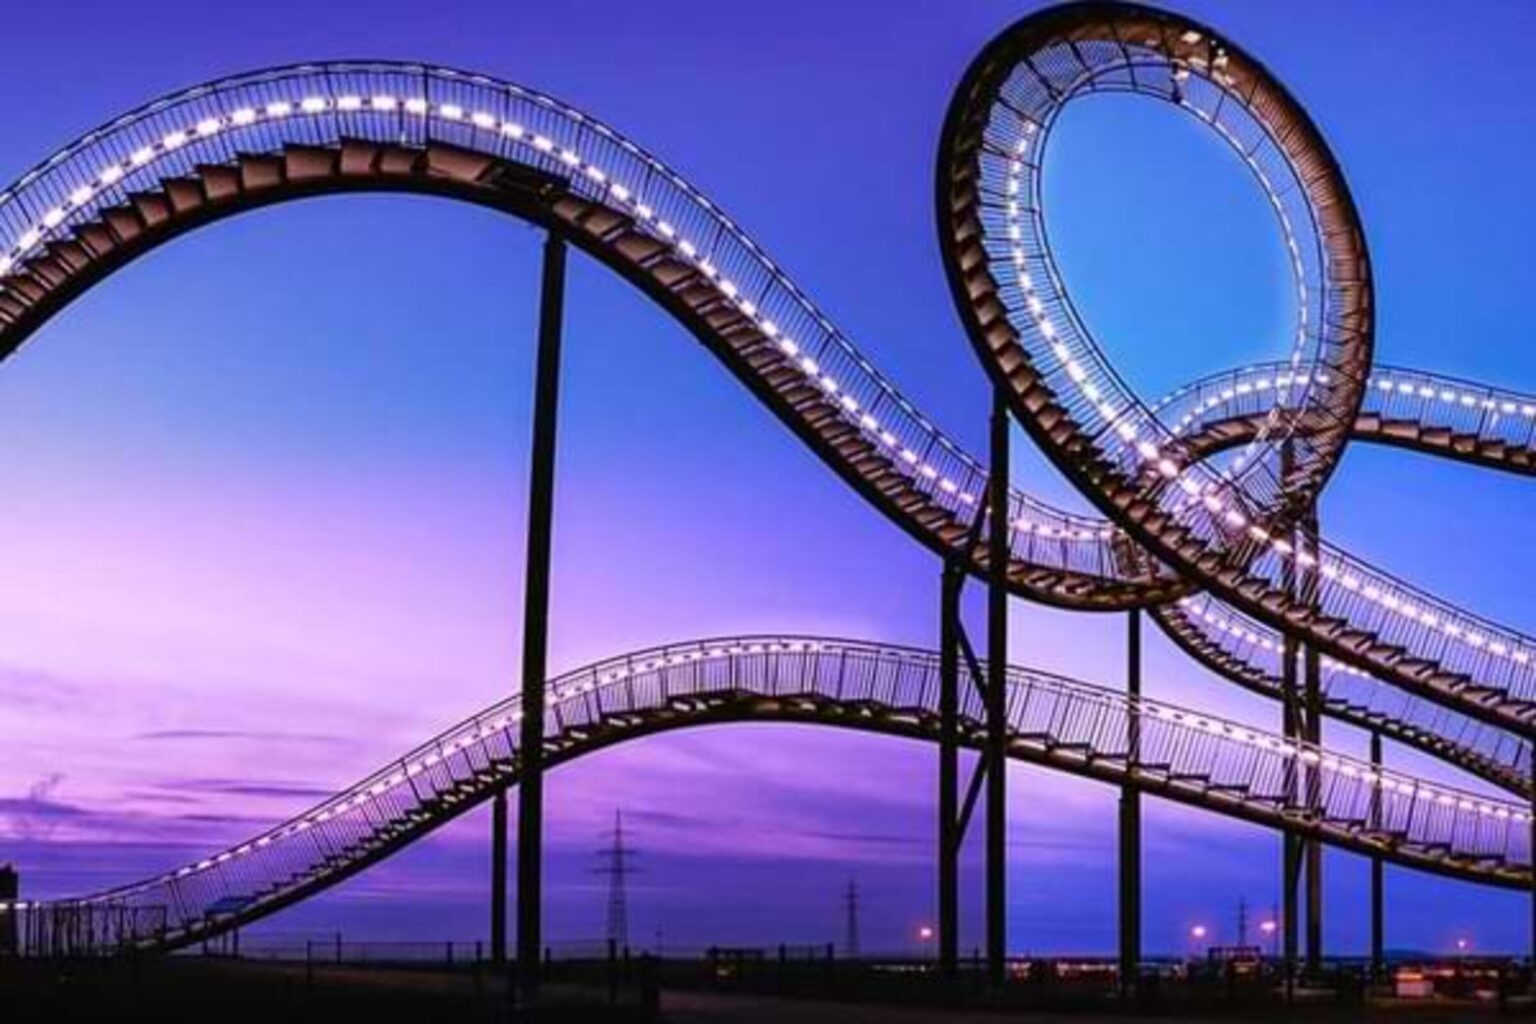 Are you craving some adrenaline after staying at home last year? Check out these amusement parks, and ride the tallest roller coaster in the world!